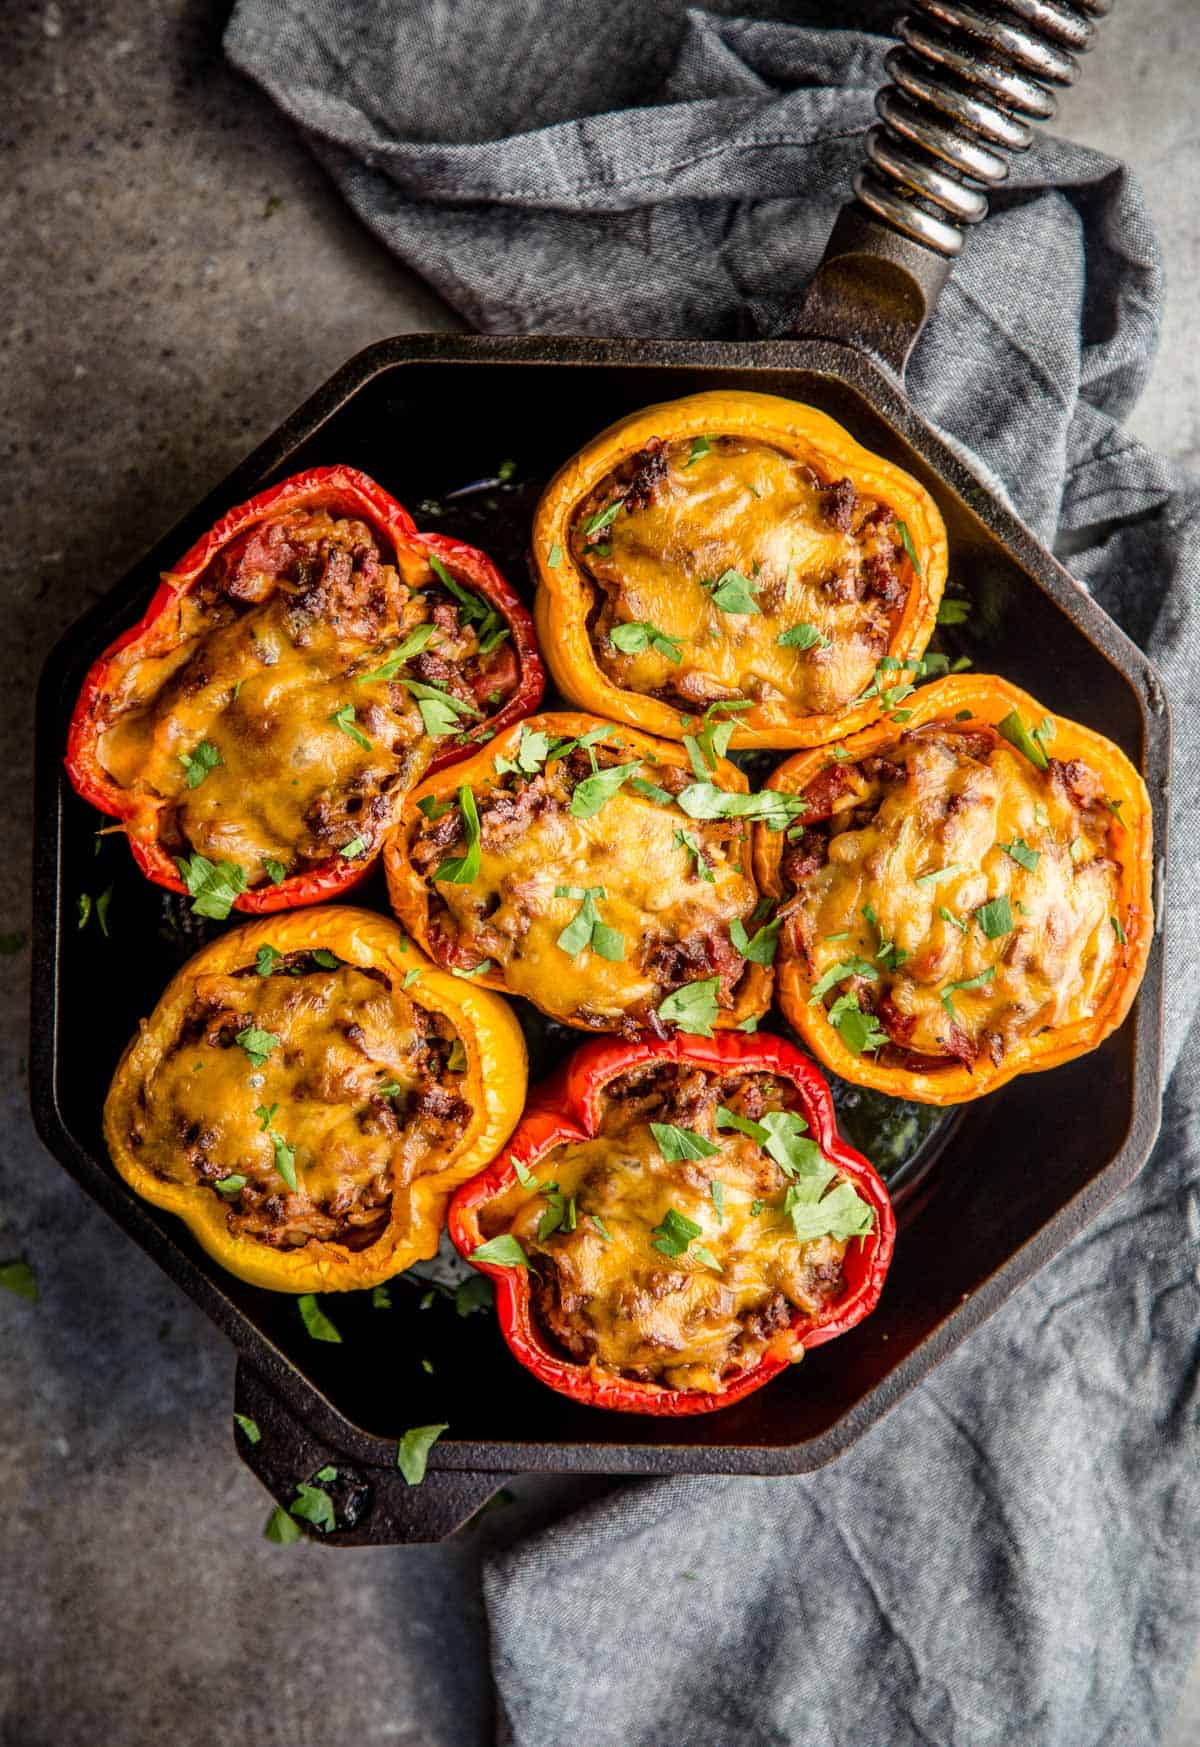 Stuffed Peppers with Ground Beef cooked on the Grill
